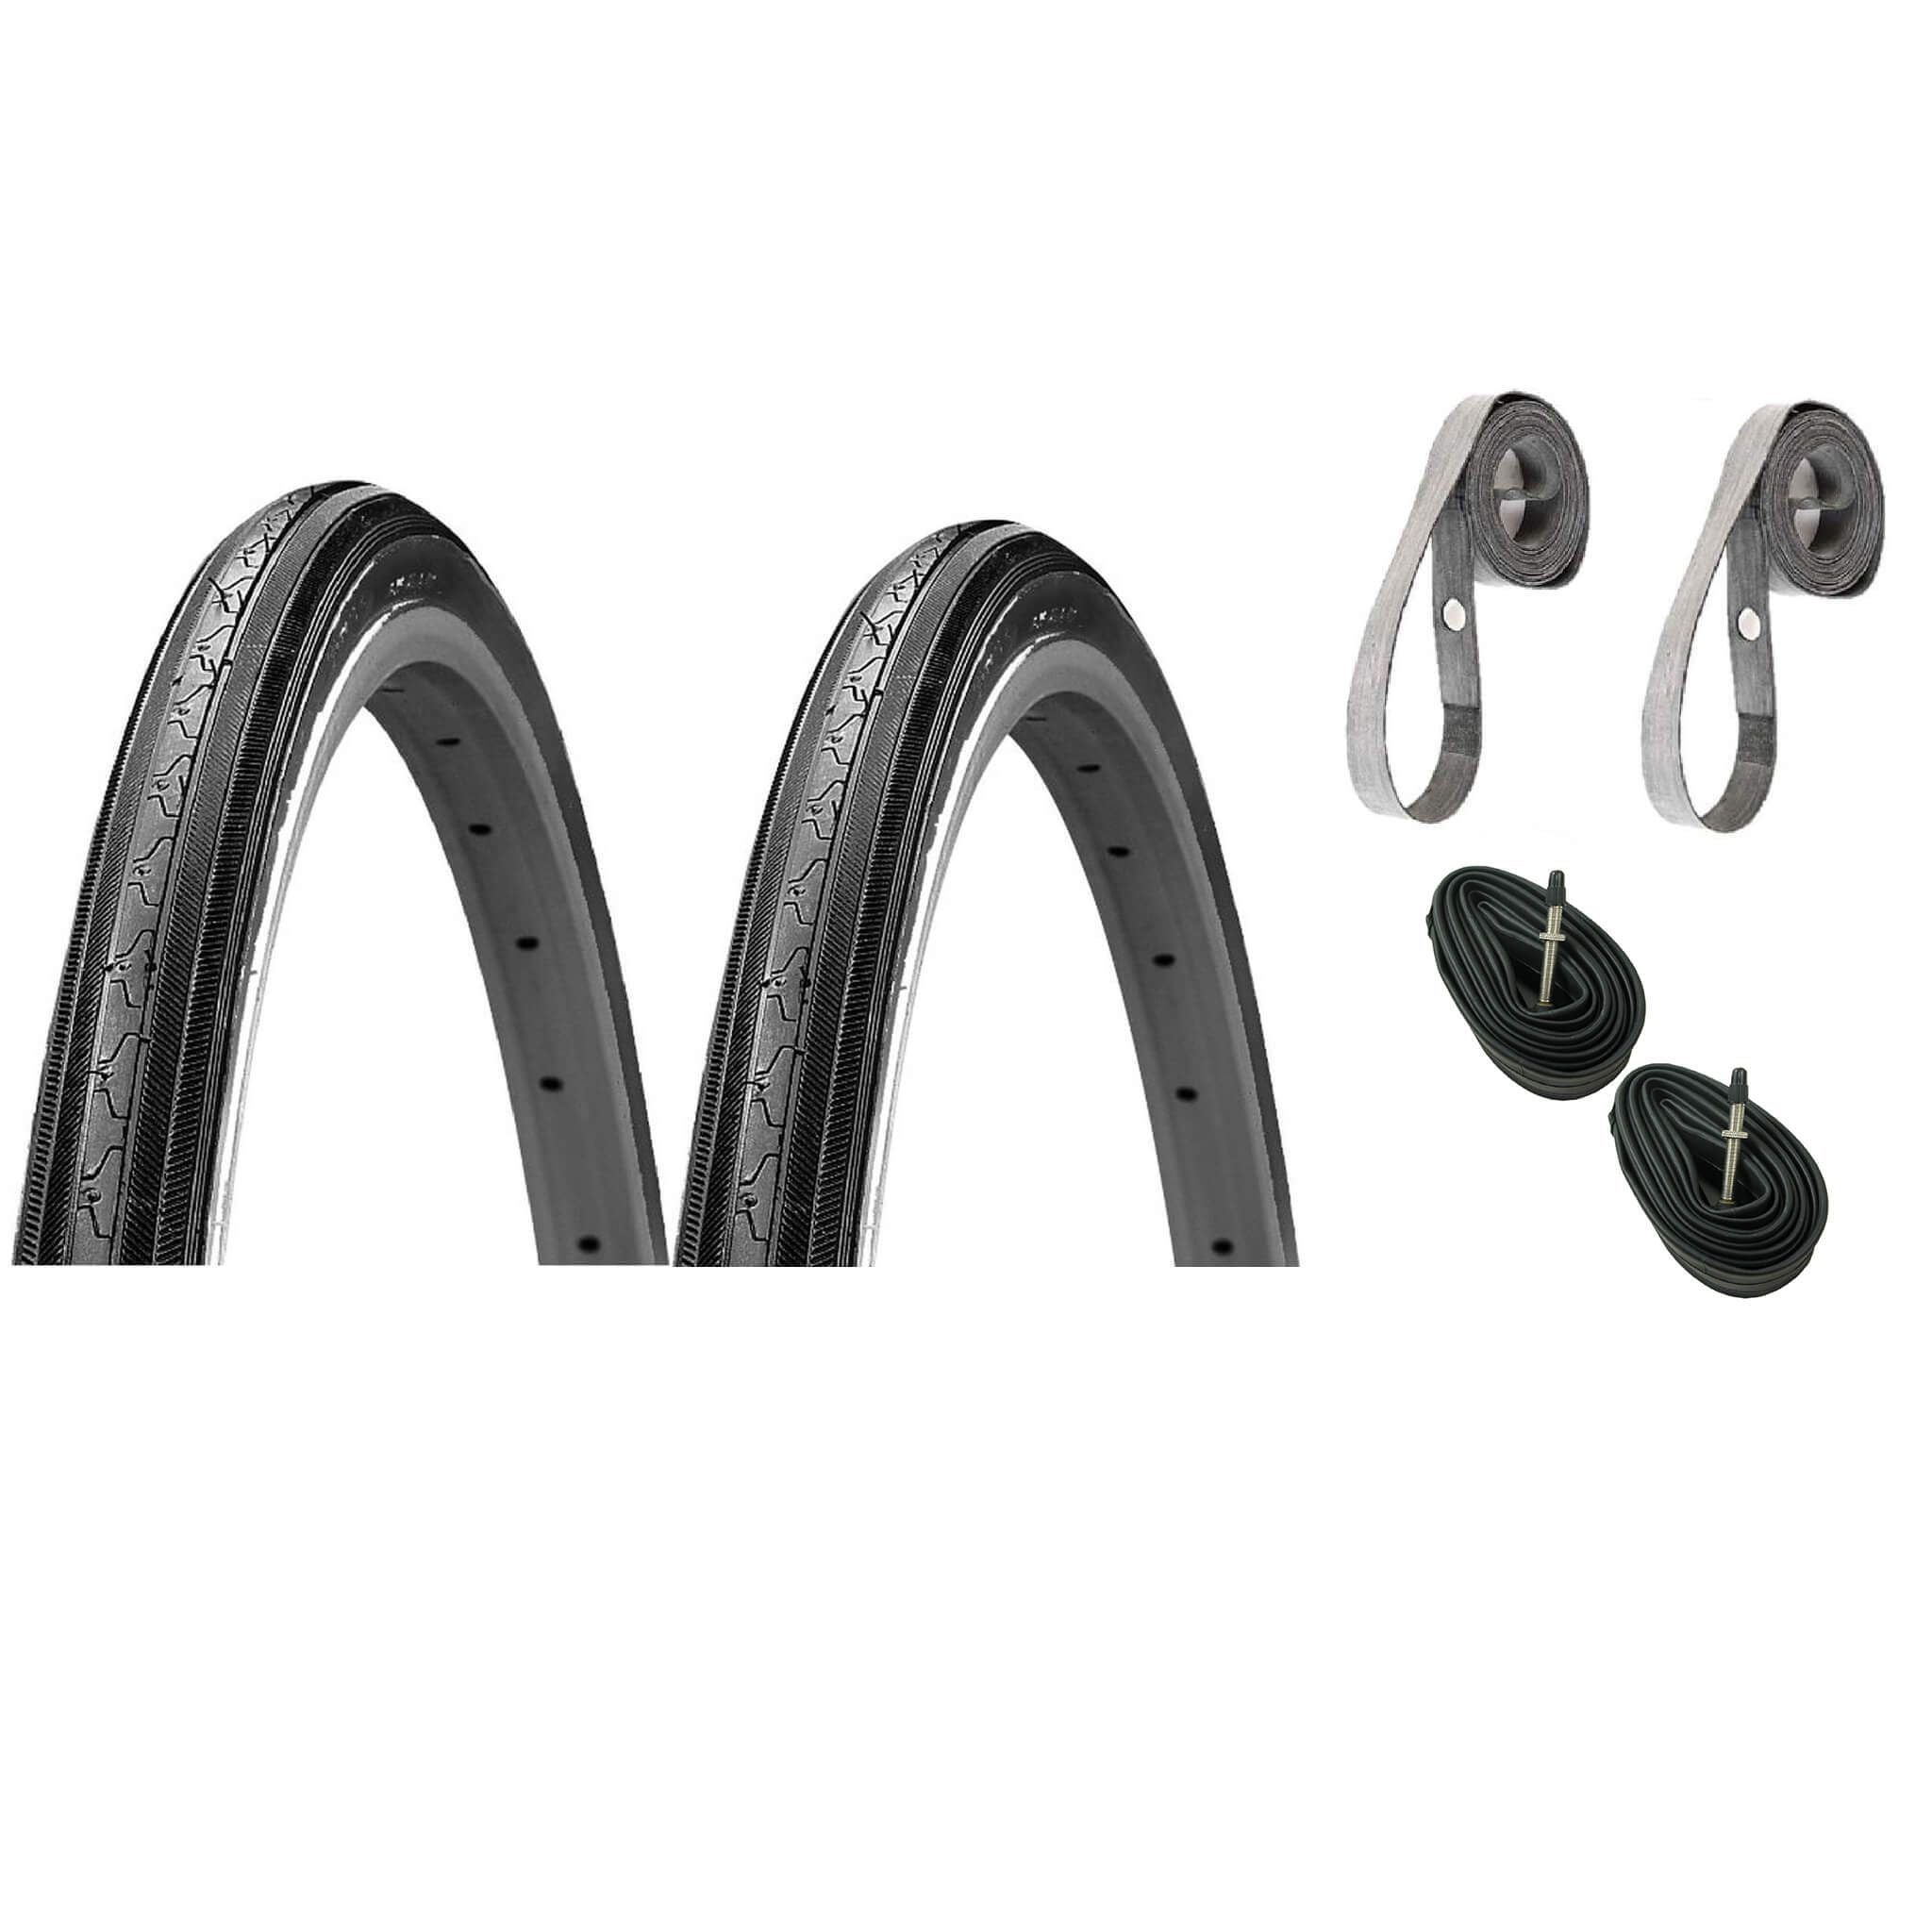 K35 27x1-1/4 Black Tire with Presta tube and rubber strips